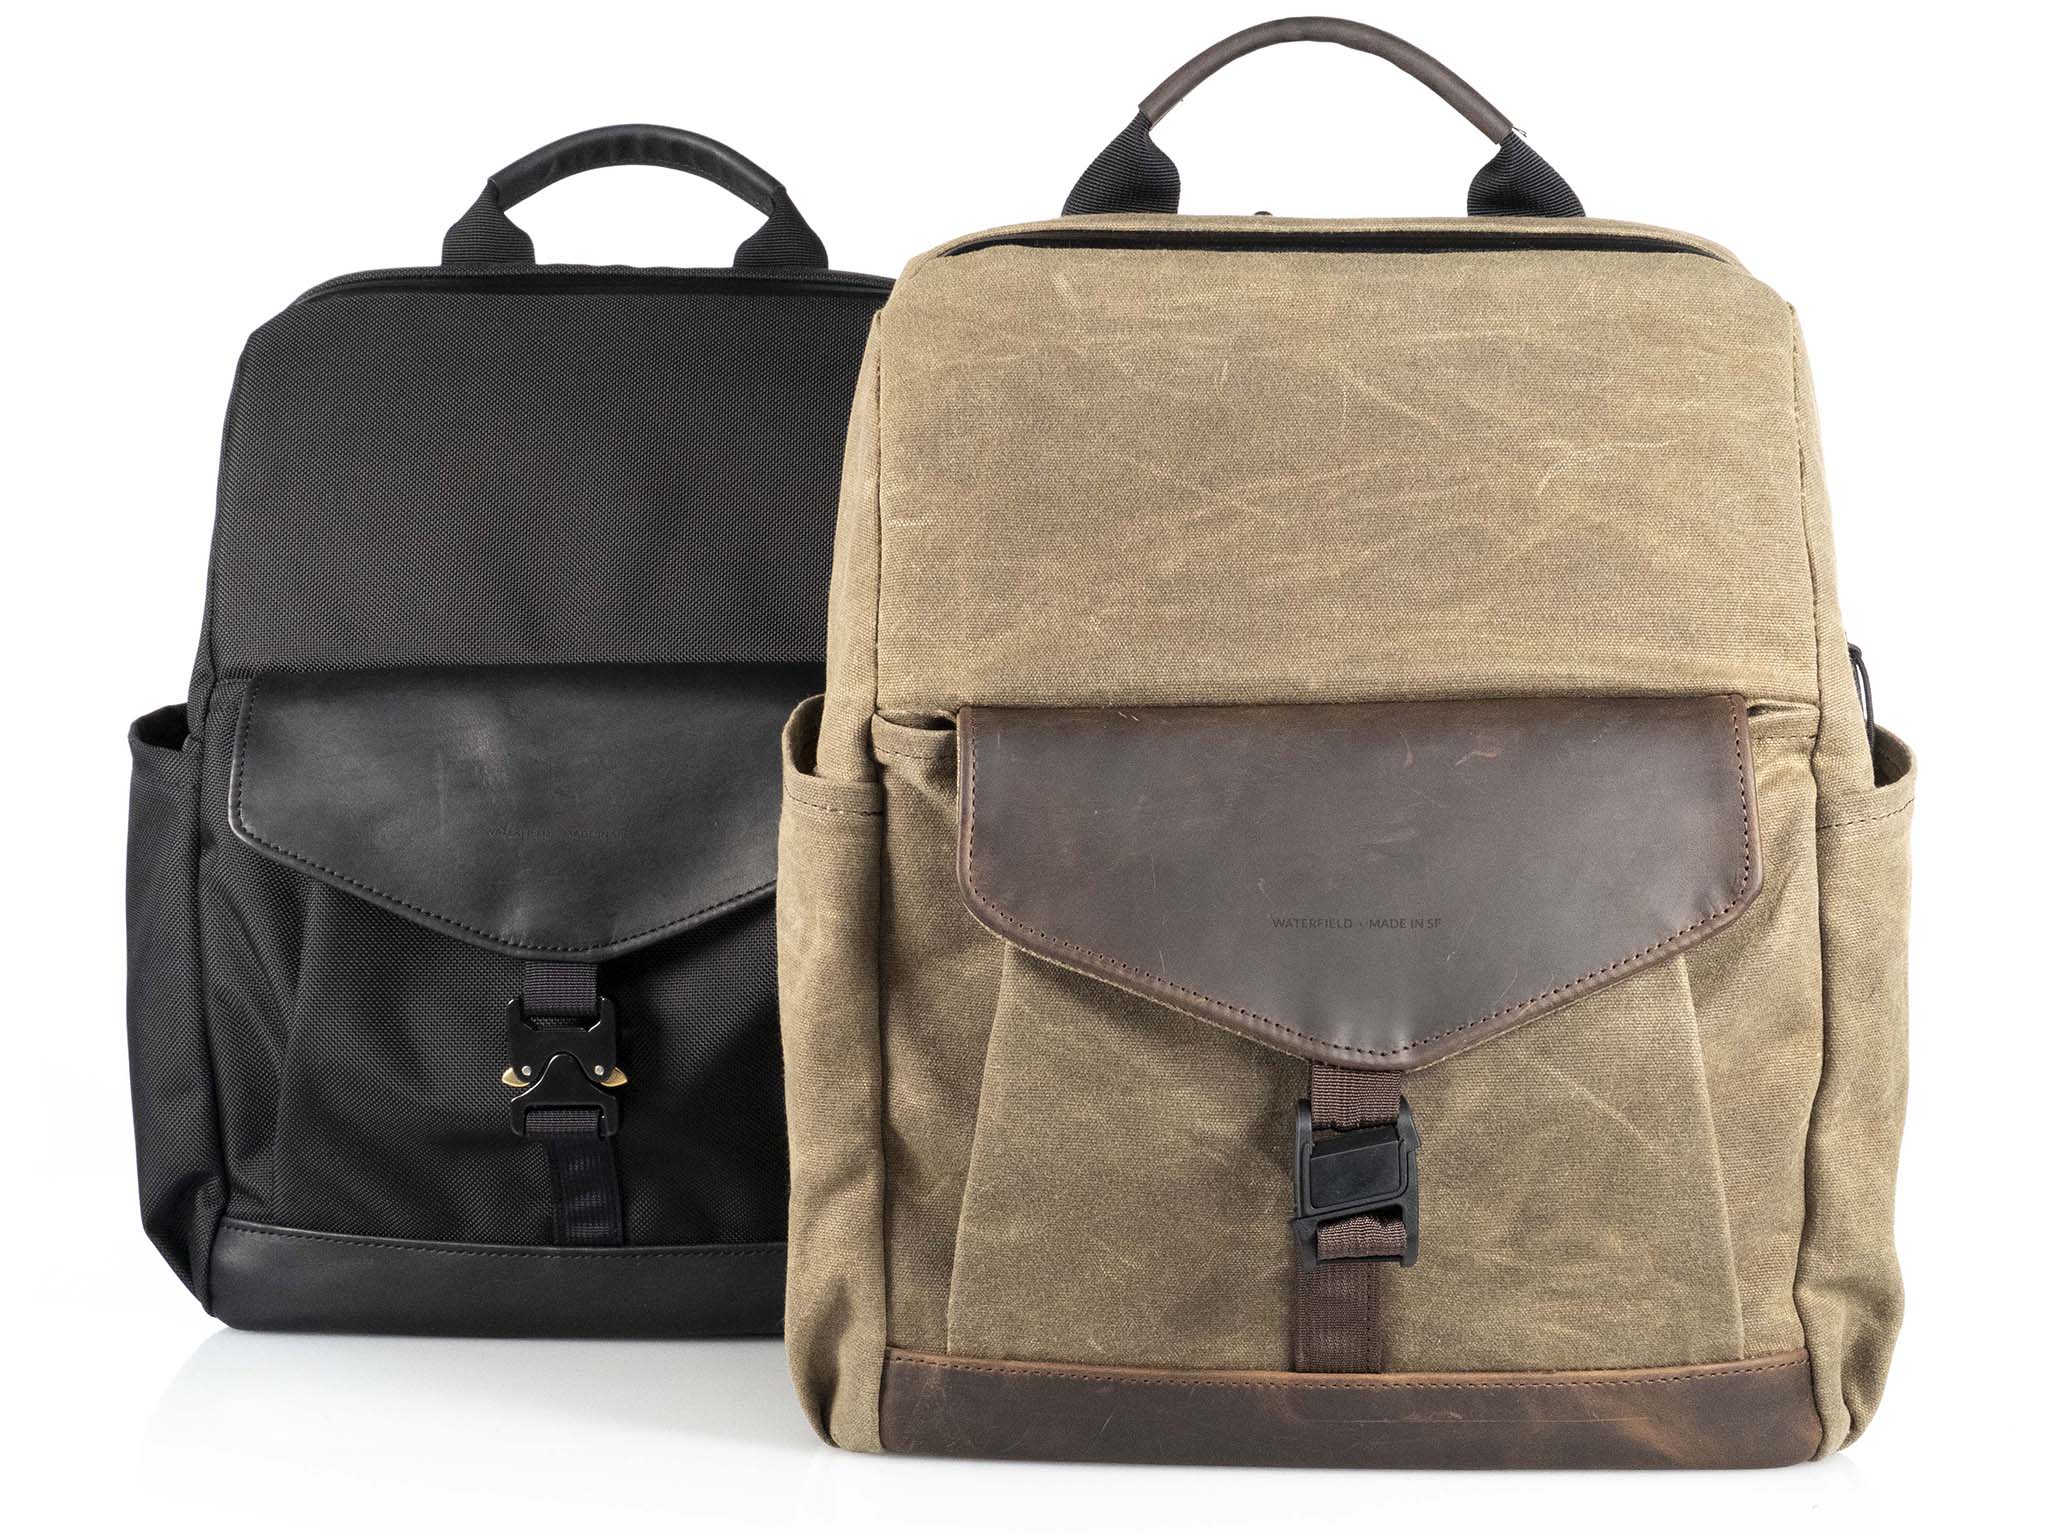 WaterField's new Mezzo Backpack is a premium mid-size laptop bag ...